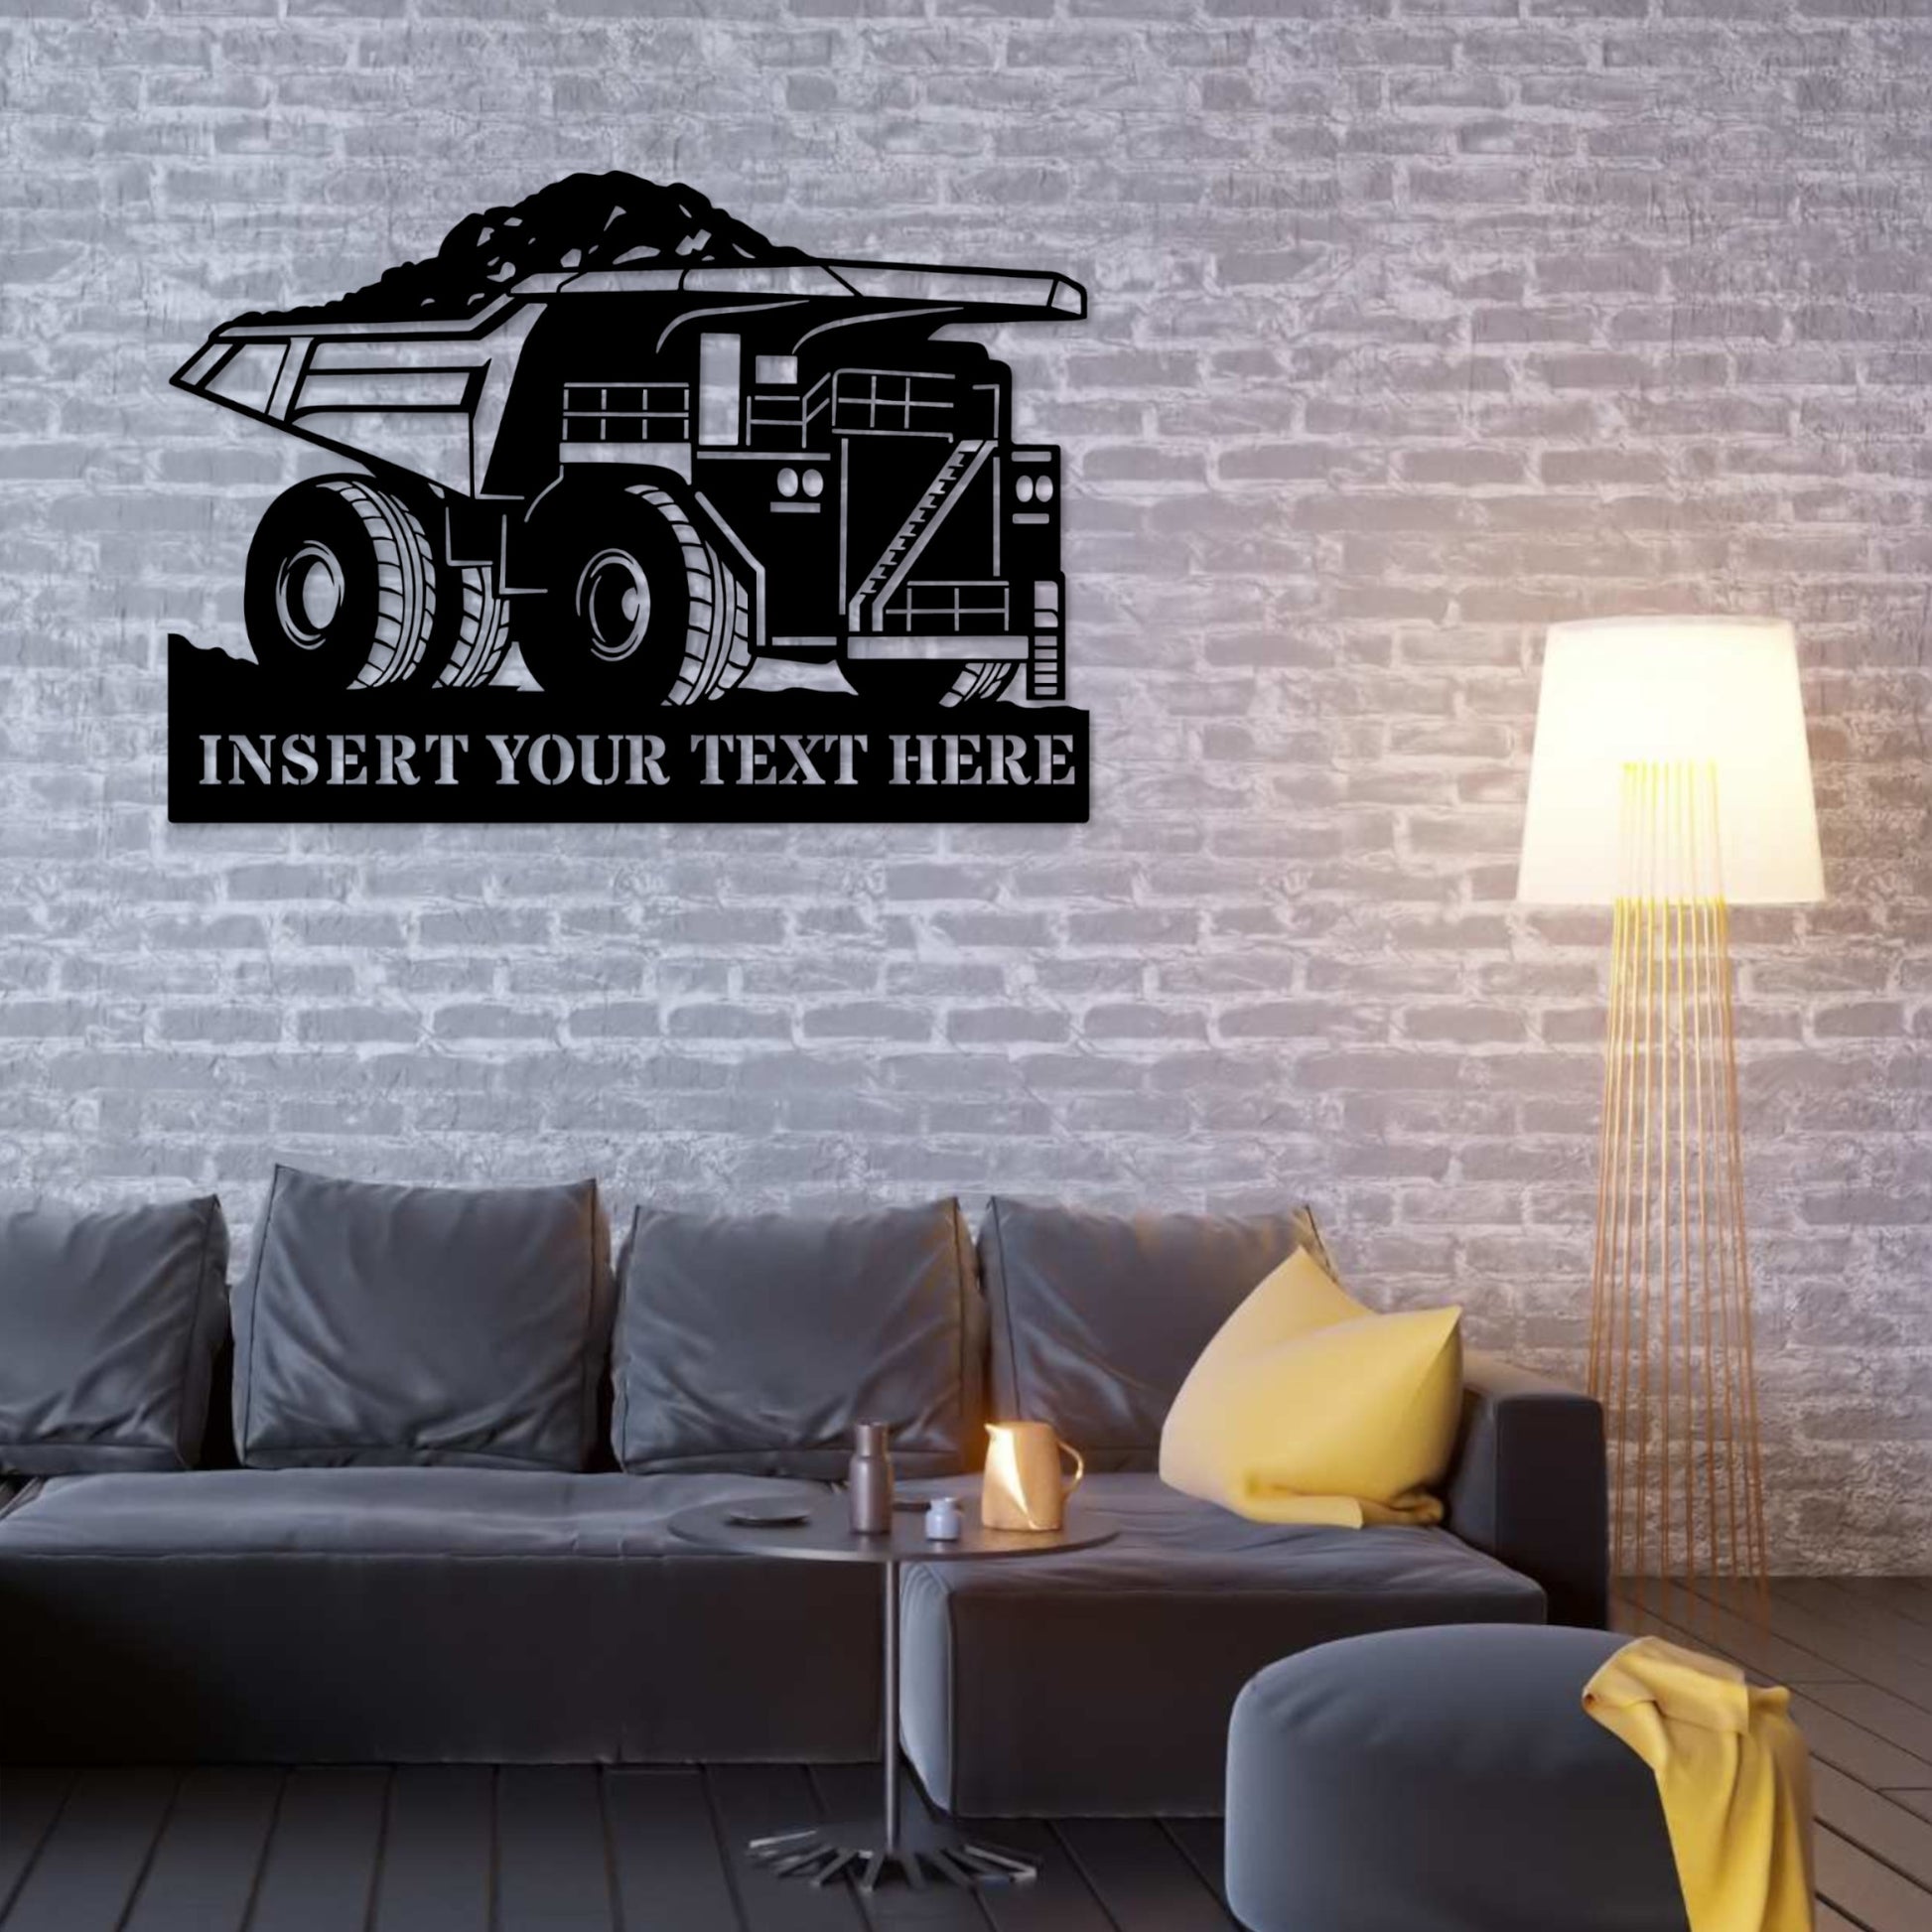 Personalized Haul Truck Name Metal Sign. Custom Dump Truck Wall Decor Gift. Tipper Truck Operator. Heavy Machinery. Dirt Mover Sign Present